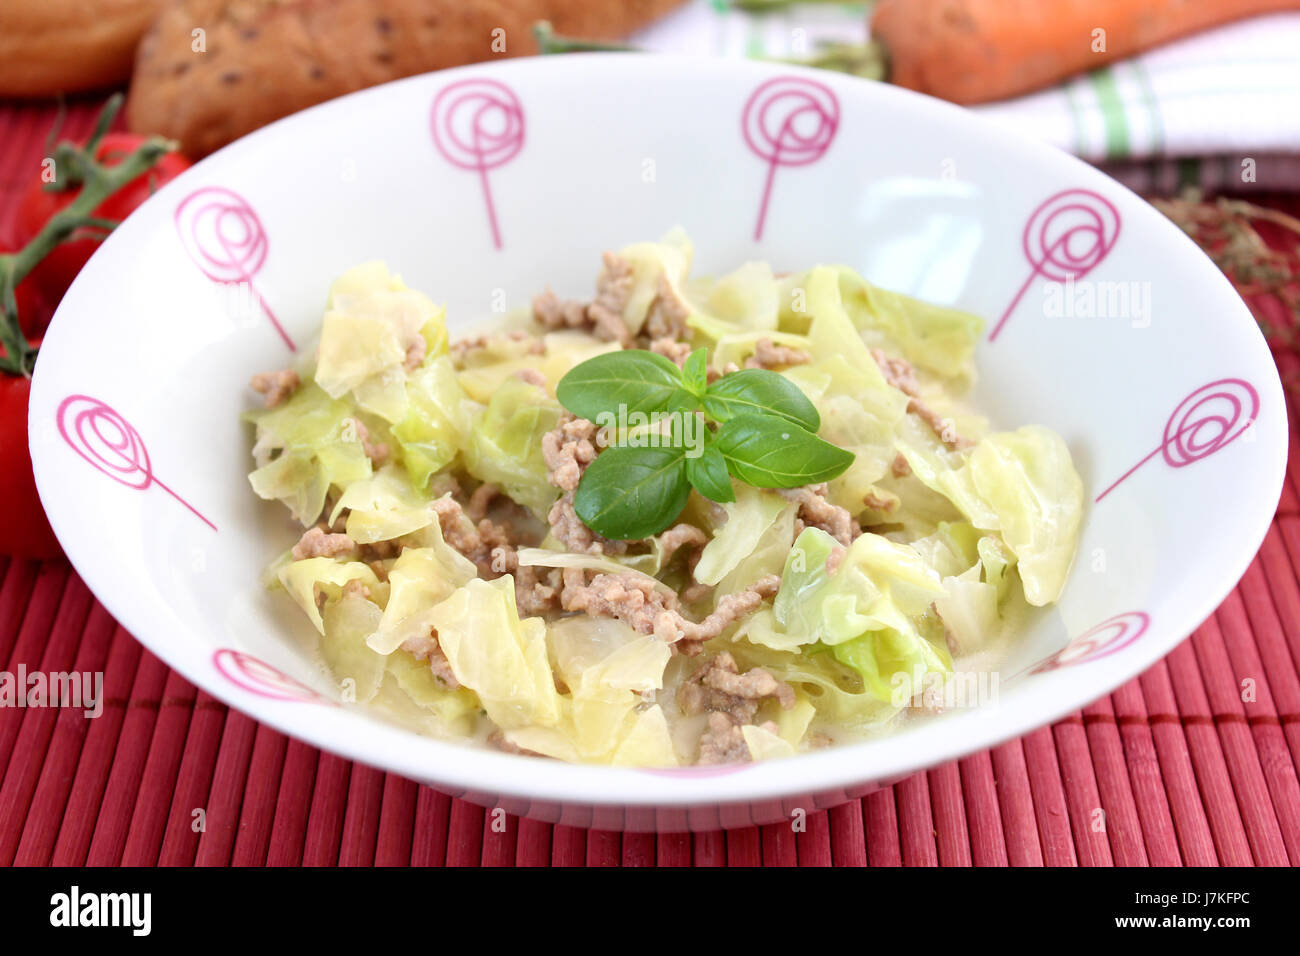 vegetable cabbage mulligan meat food aliment dainty vegetable dish meal midday Stock Photo